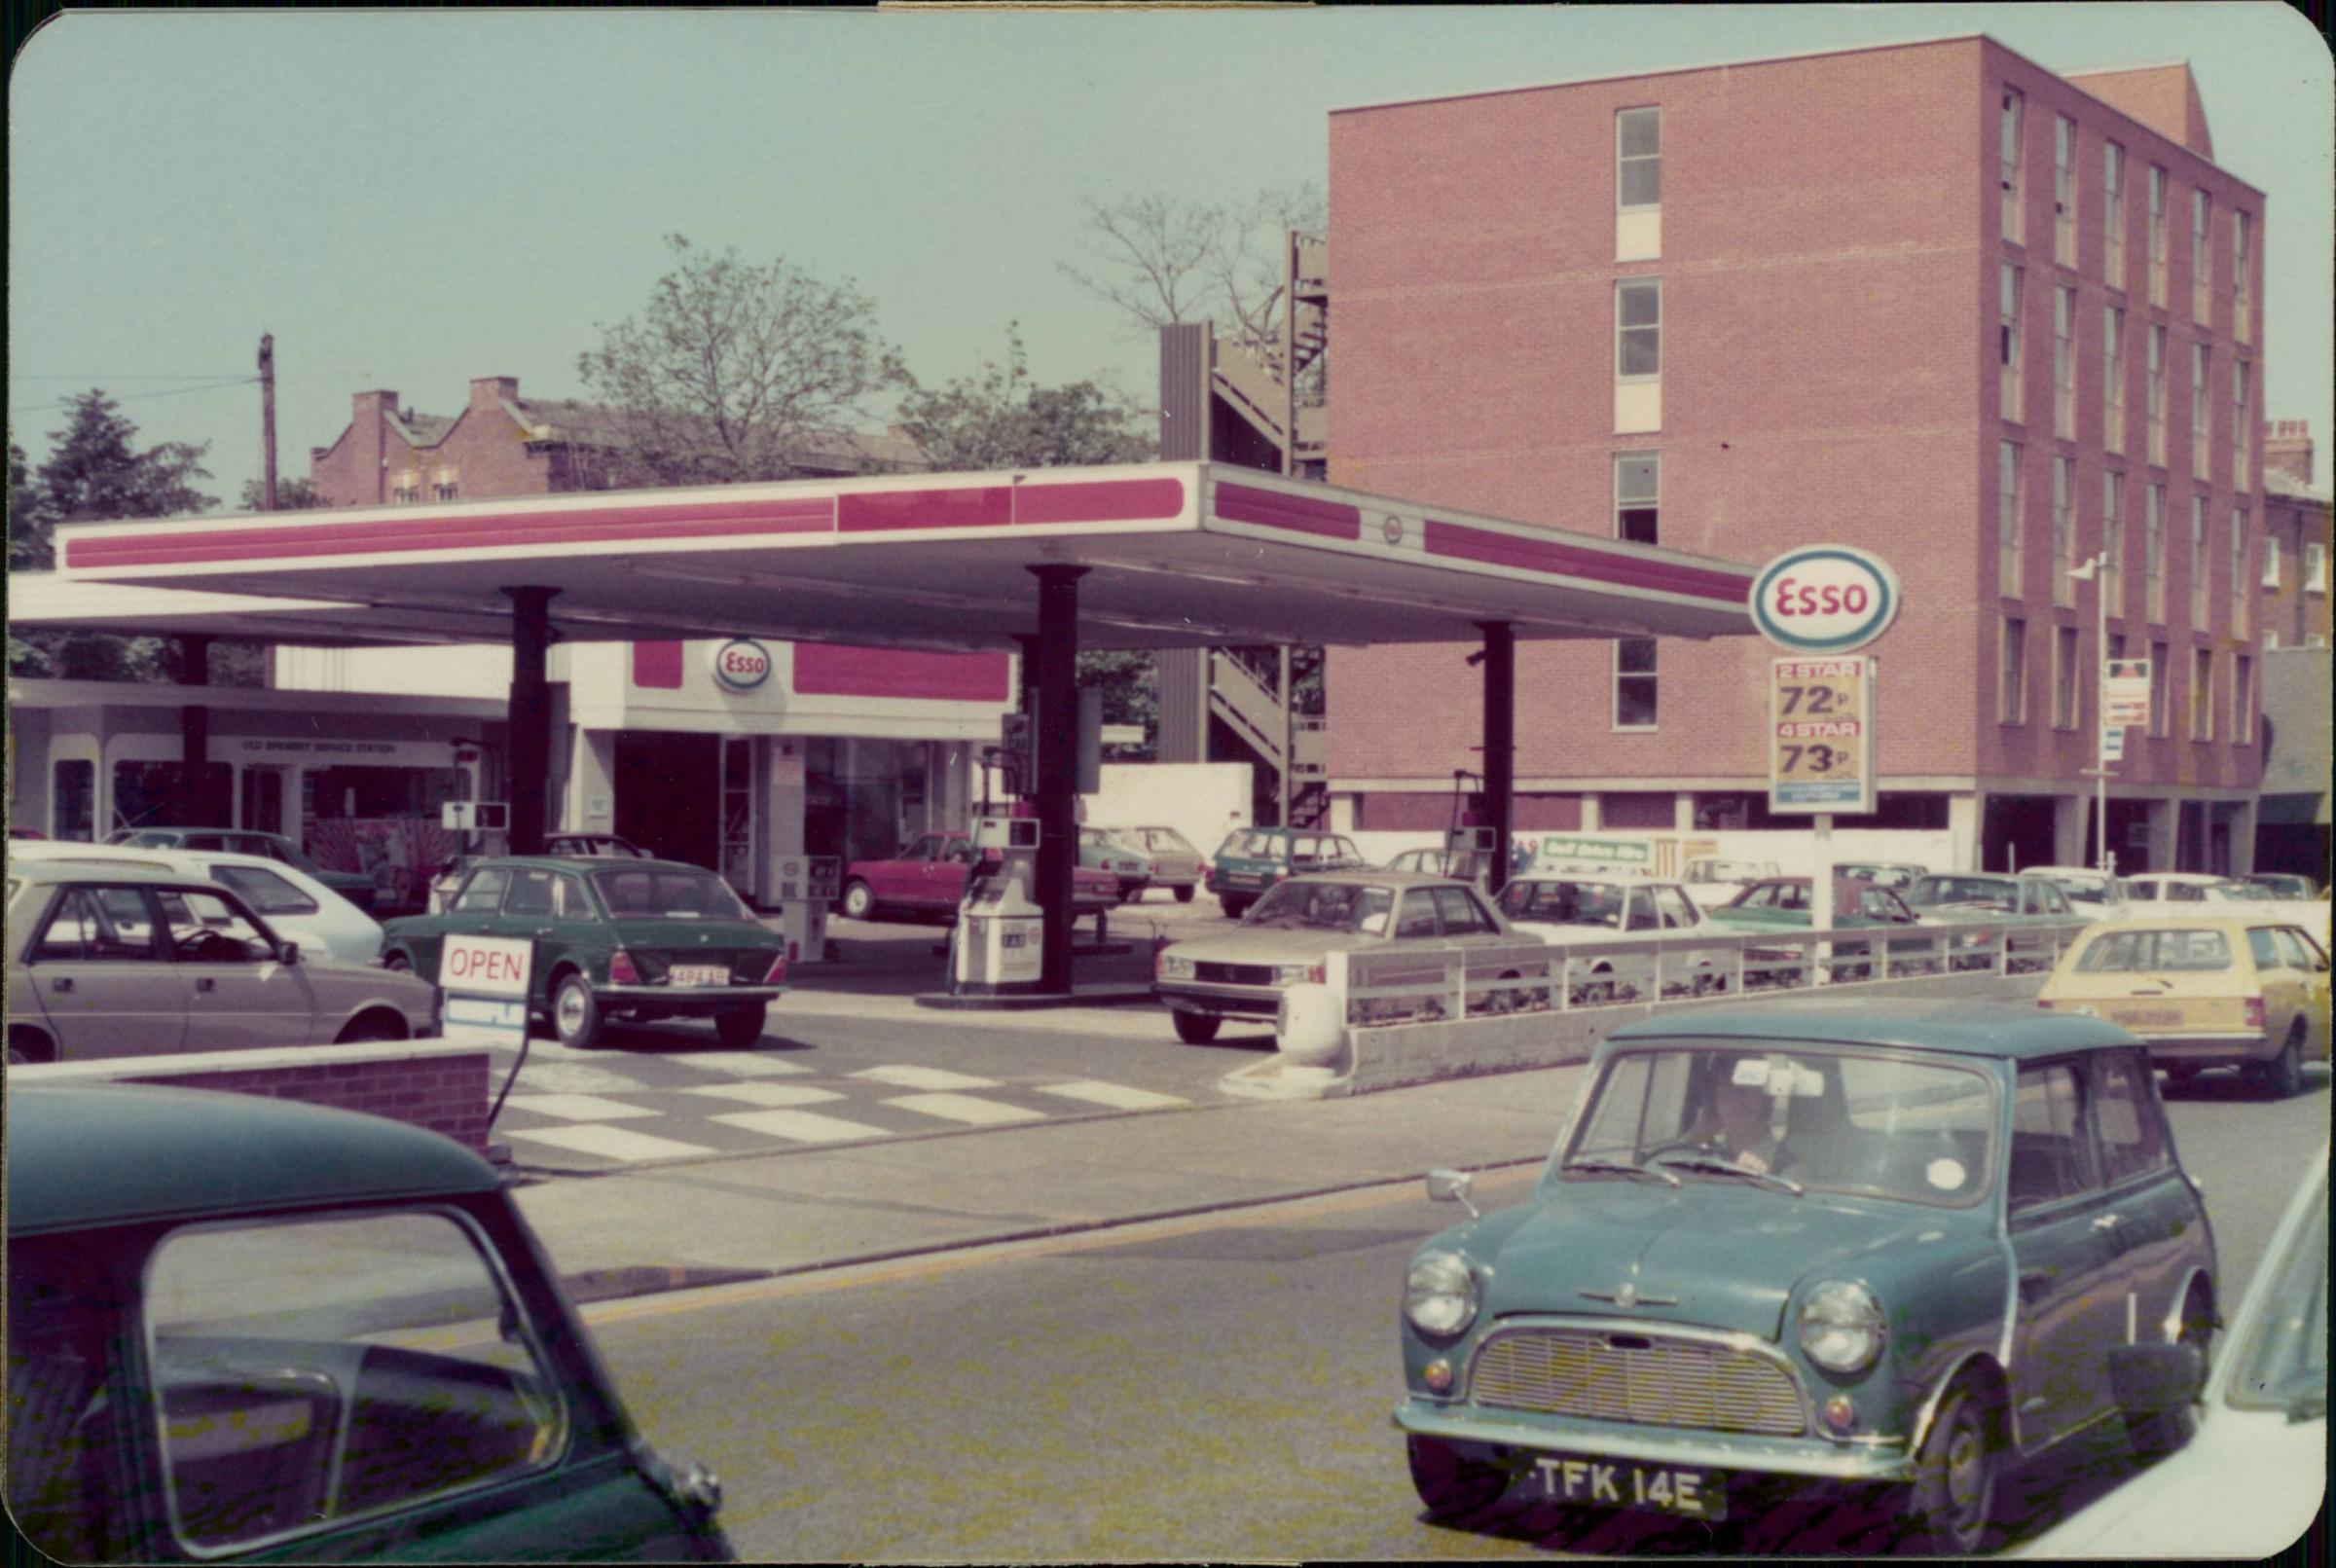 The petrol station in Barbourne, shown here in 1978, that for a few years stood on the site of Spreckley’s